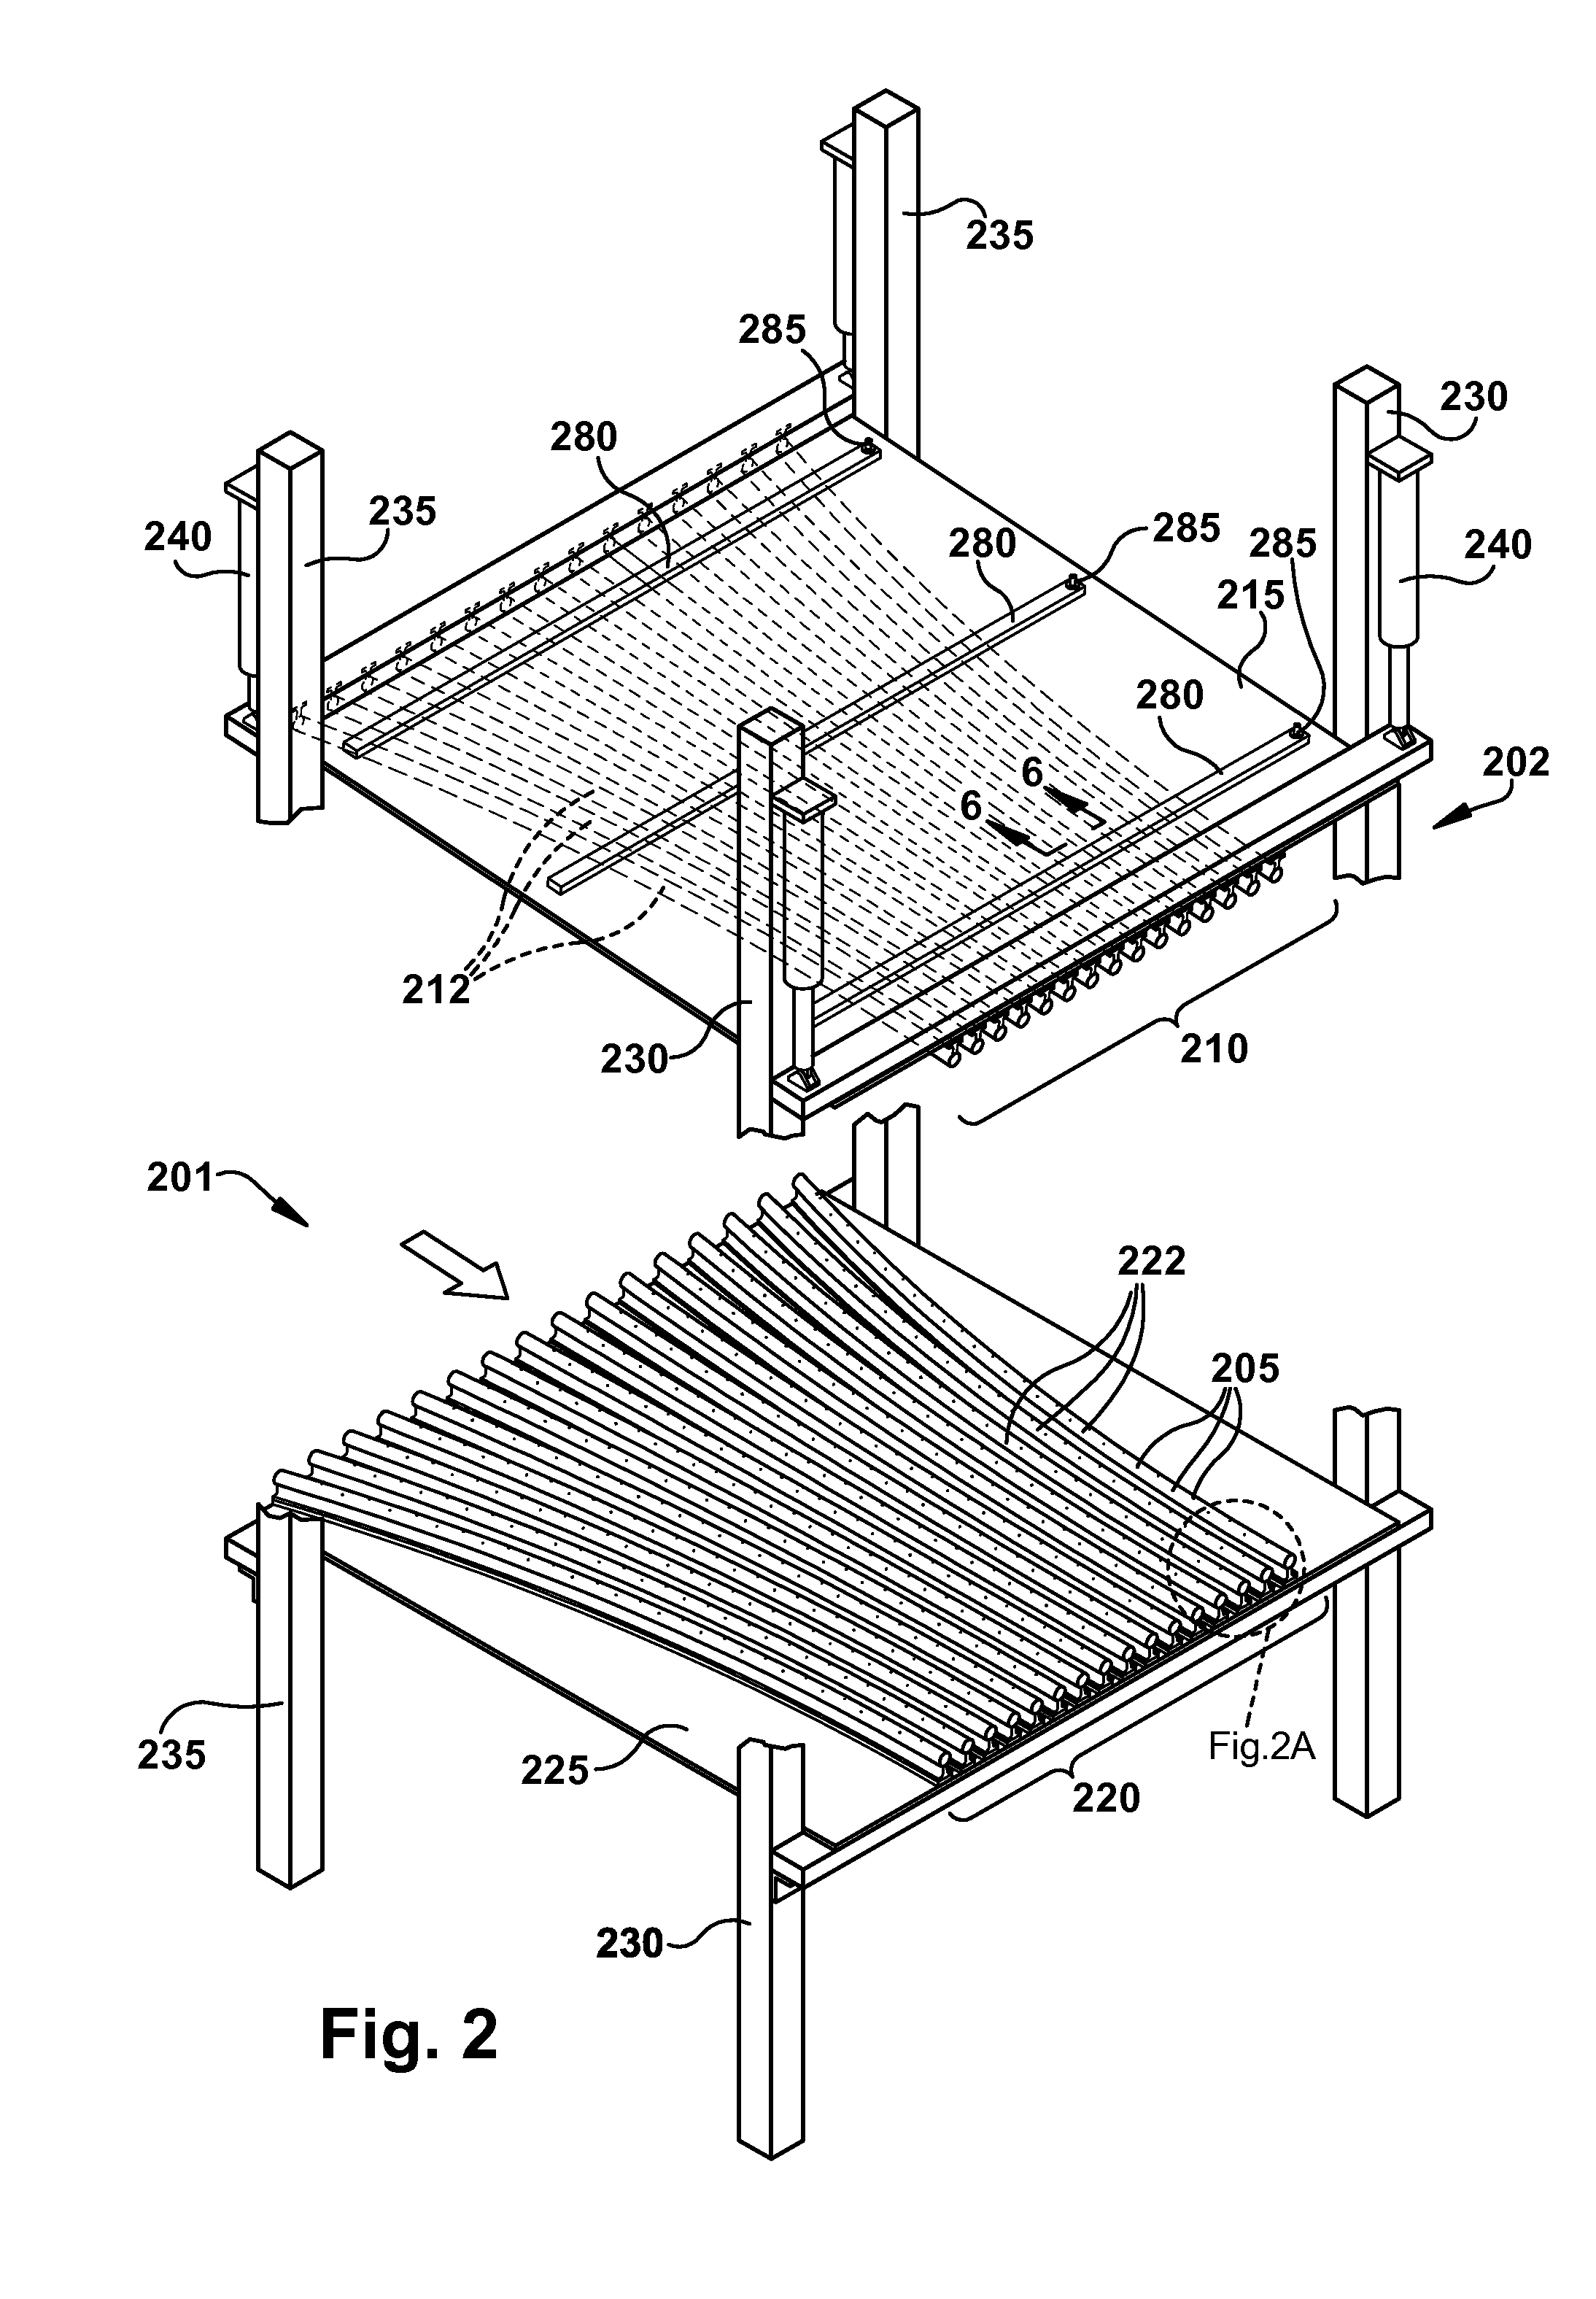 Method and apparatus for fluting a web in the machine direction